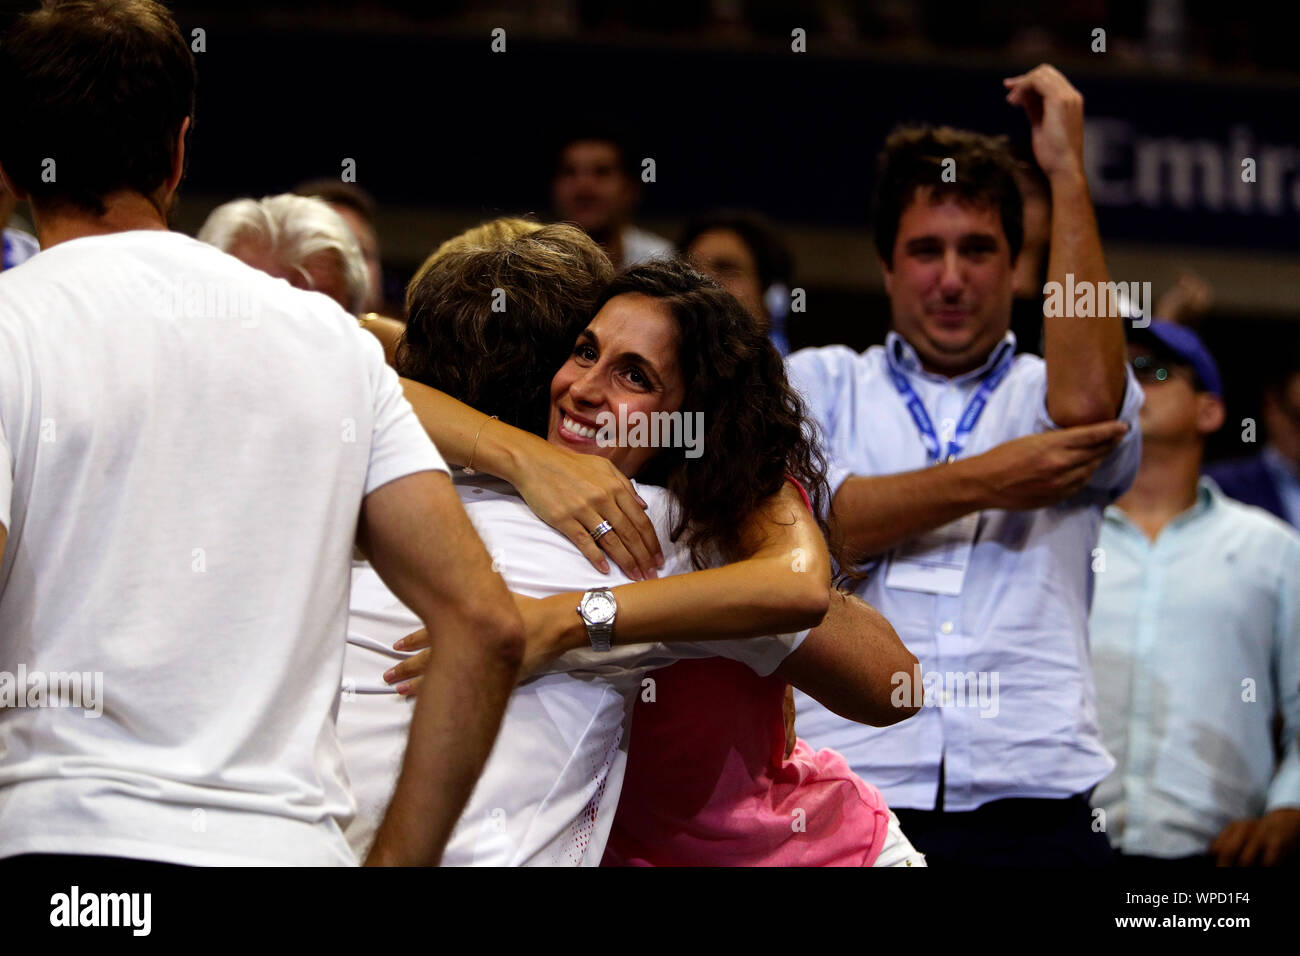 New York, United States. 08th Sep, 2019. Flushing Meadows, New York, United  States - September 8, 2019. Xisca Perello, Rafael Nadal's finance  celebrates with other members of their team after Nadal defeated